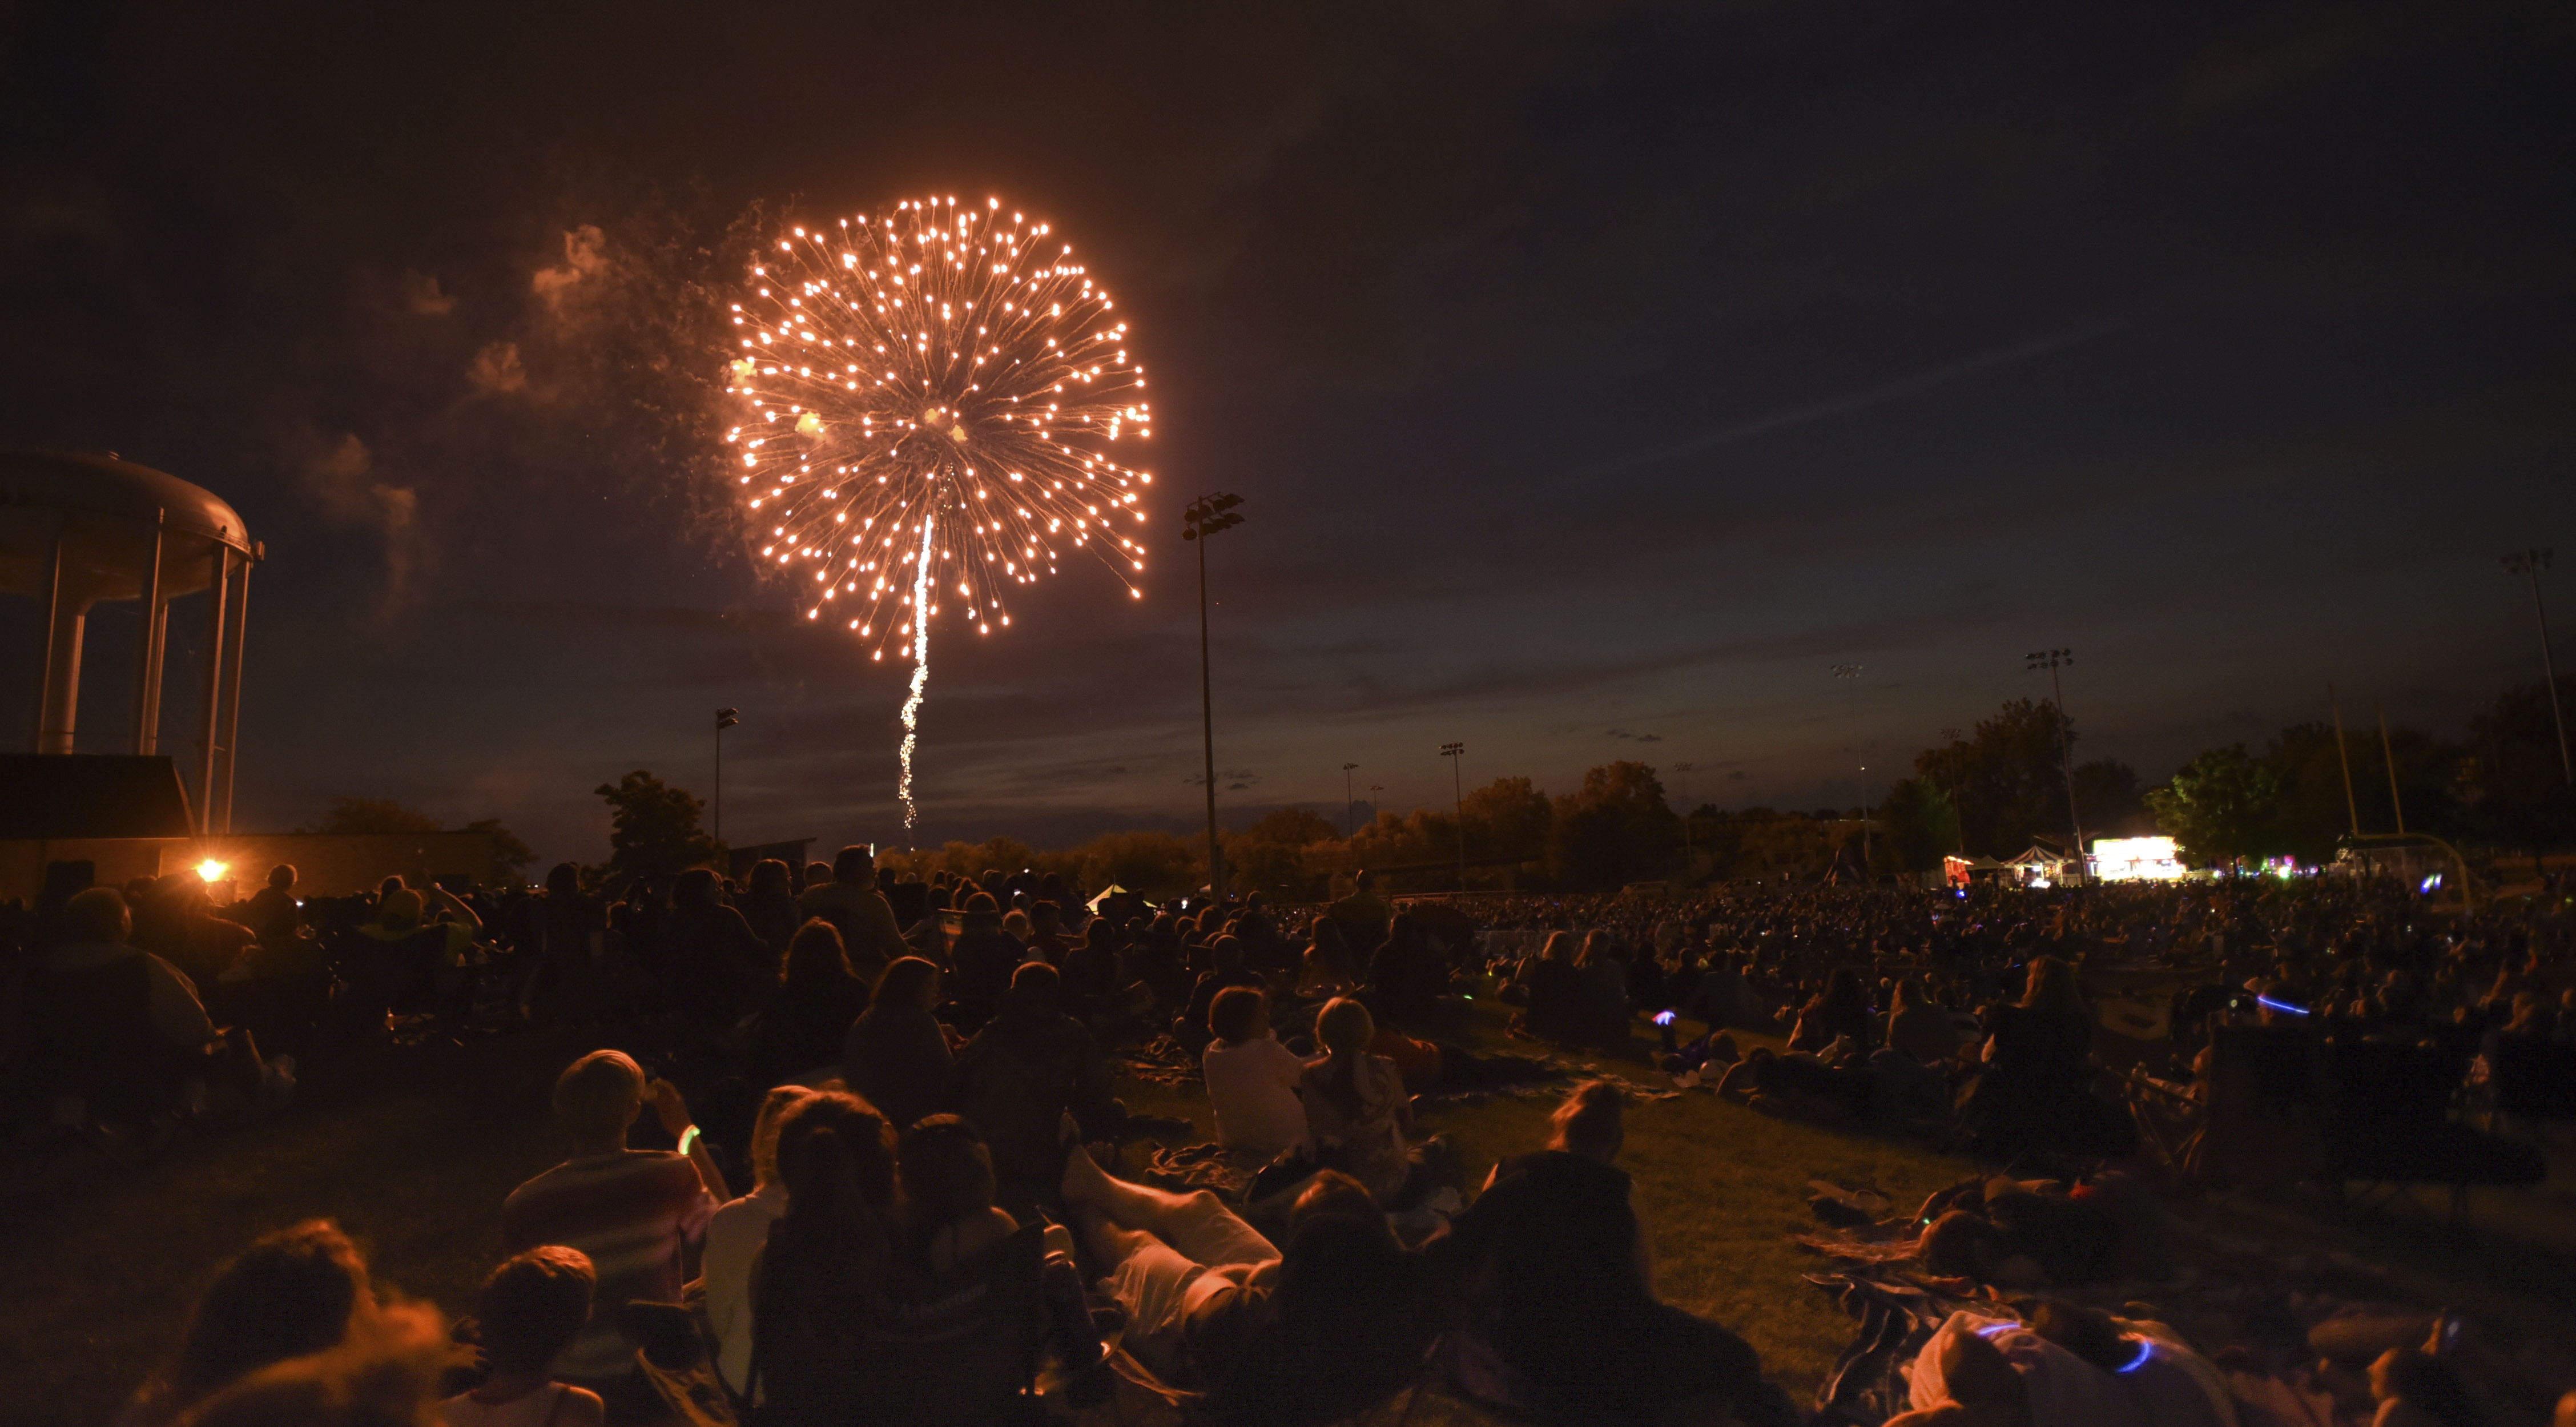 People watch fireworks at Graf Park over Wheaton, Ill., Monday July 3, 2017. (Mark Black/Daily Herald via AP)